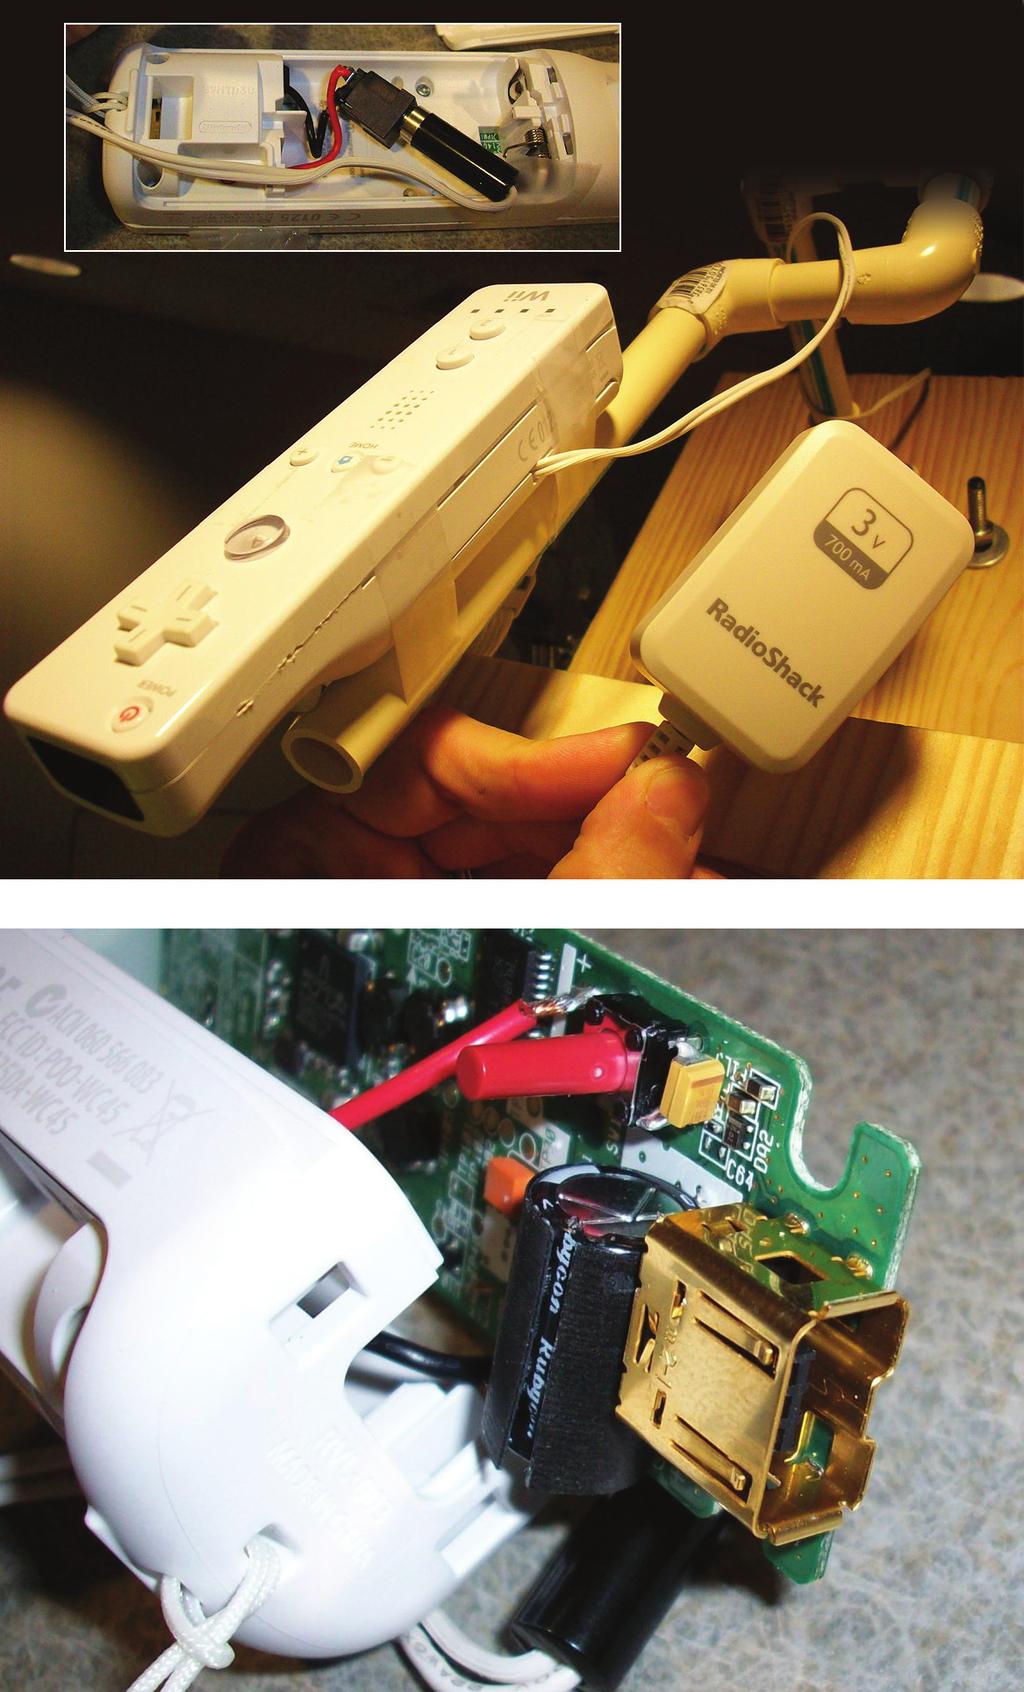 Tutorial (a) Wii gaming, in which accuracy is second to enjoyment and playability. As a first example, consider the inherent drift in Wiimotes.